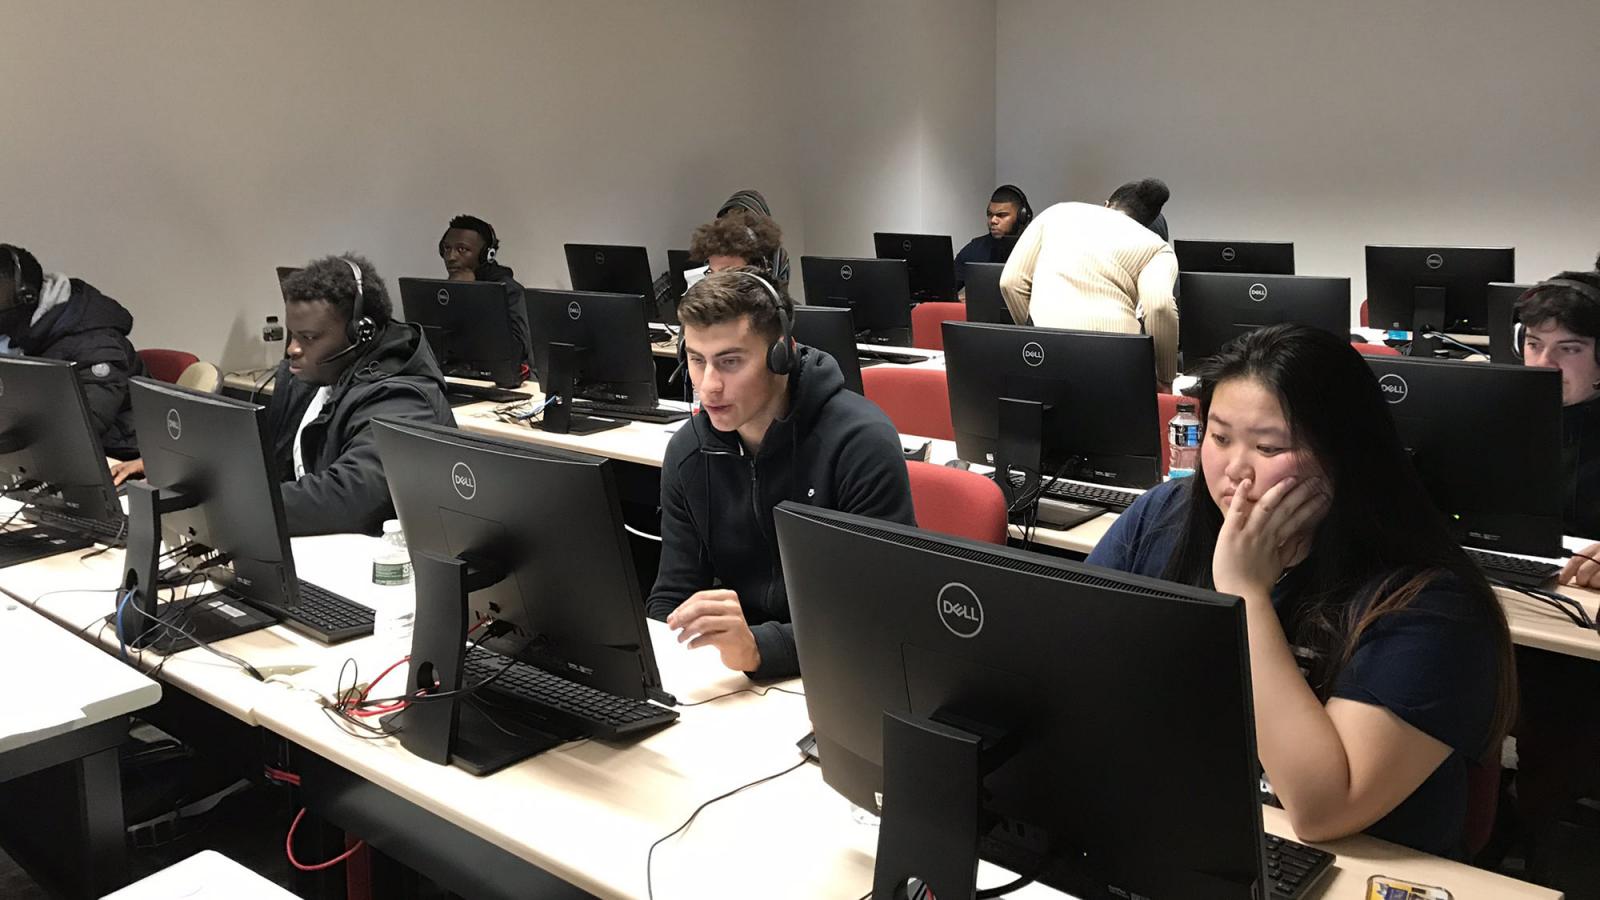 Pace university students in a computer lab on campus.